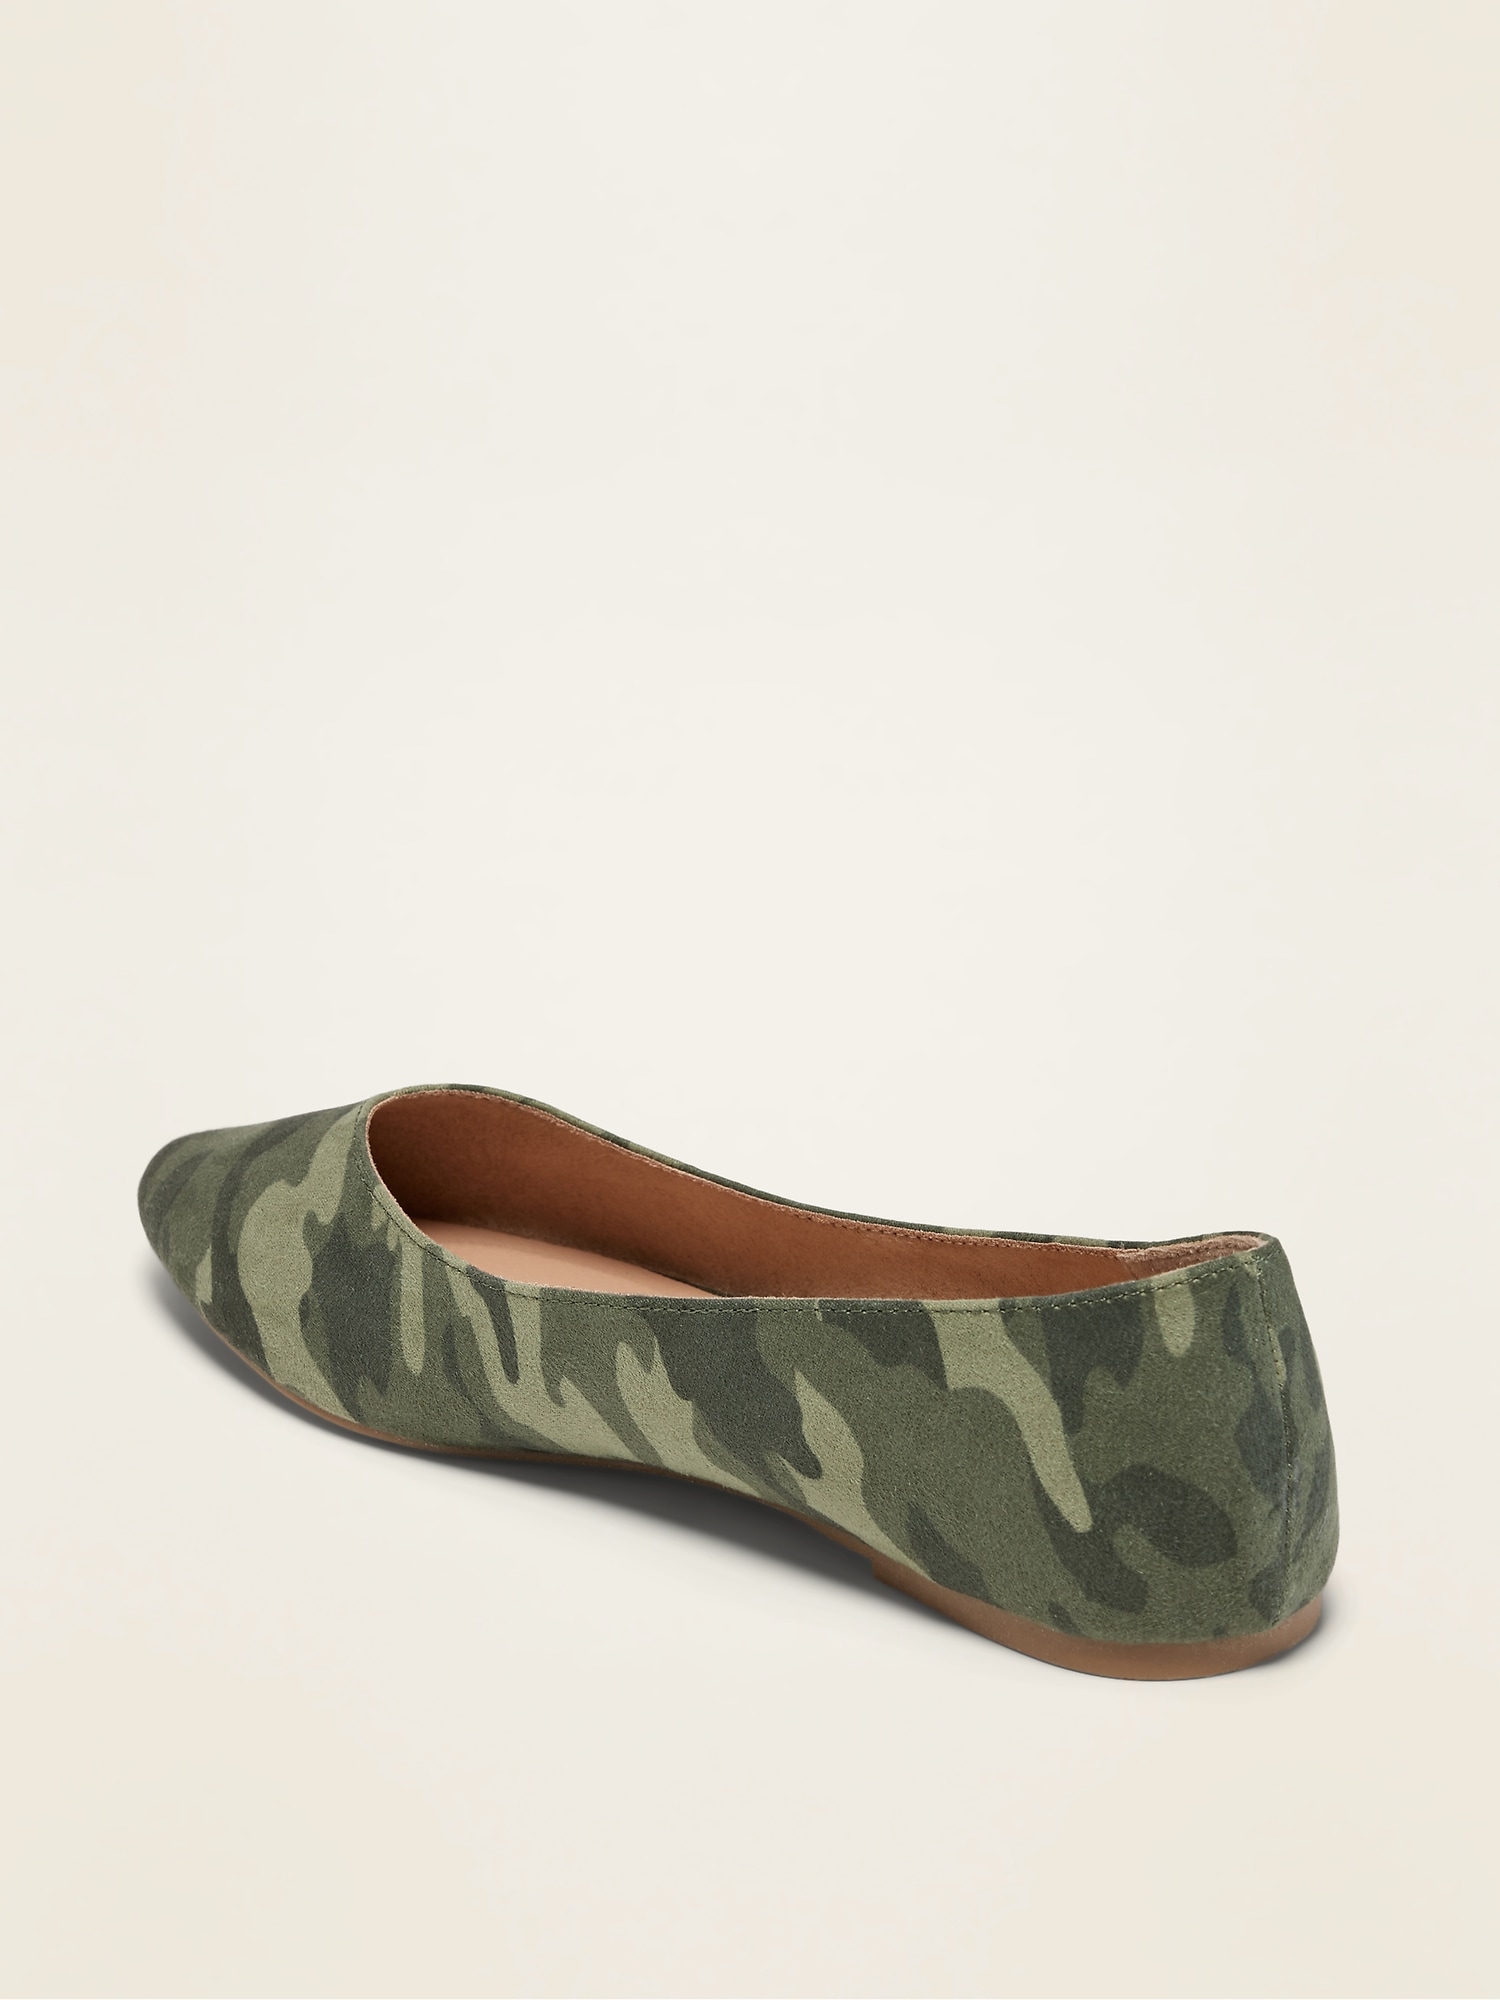 old navy women's flat shoes